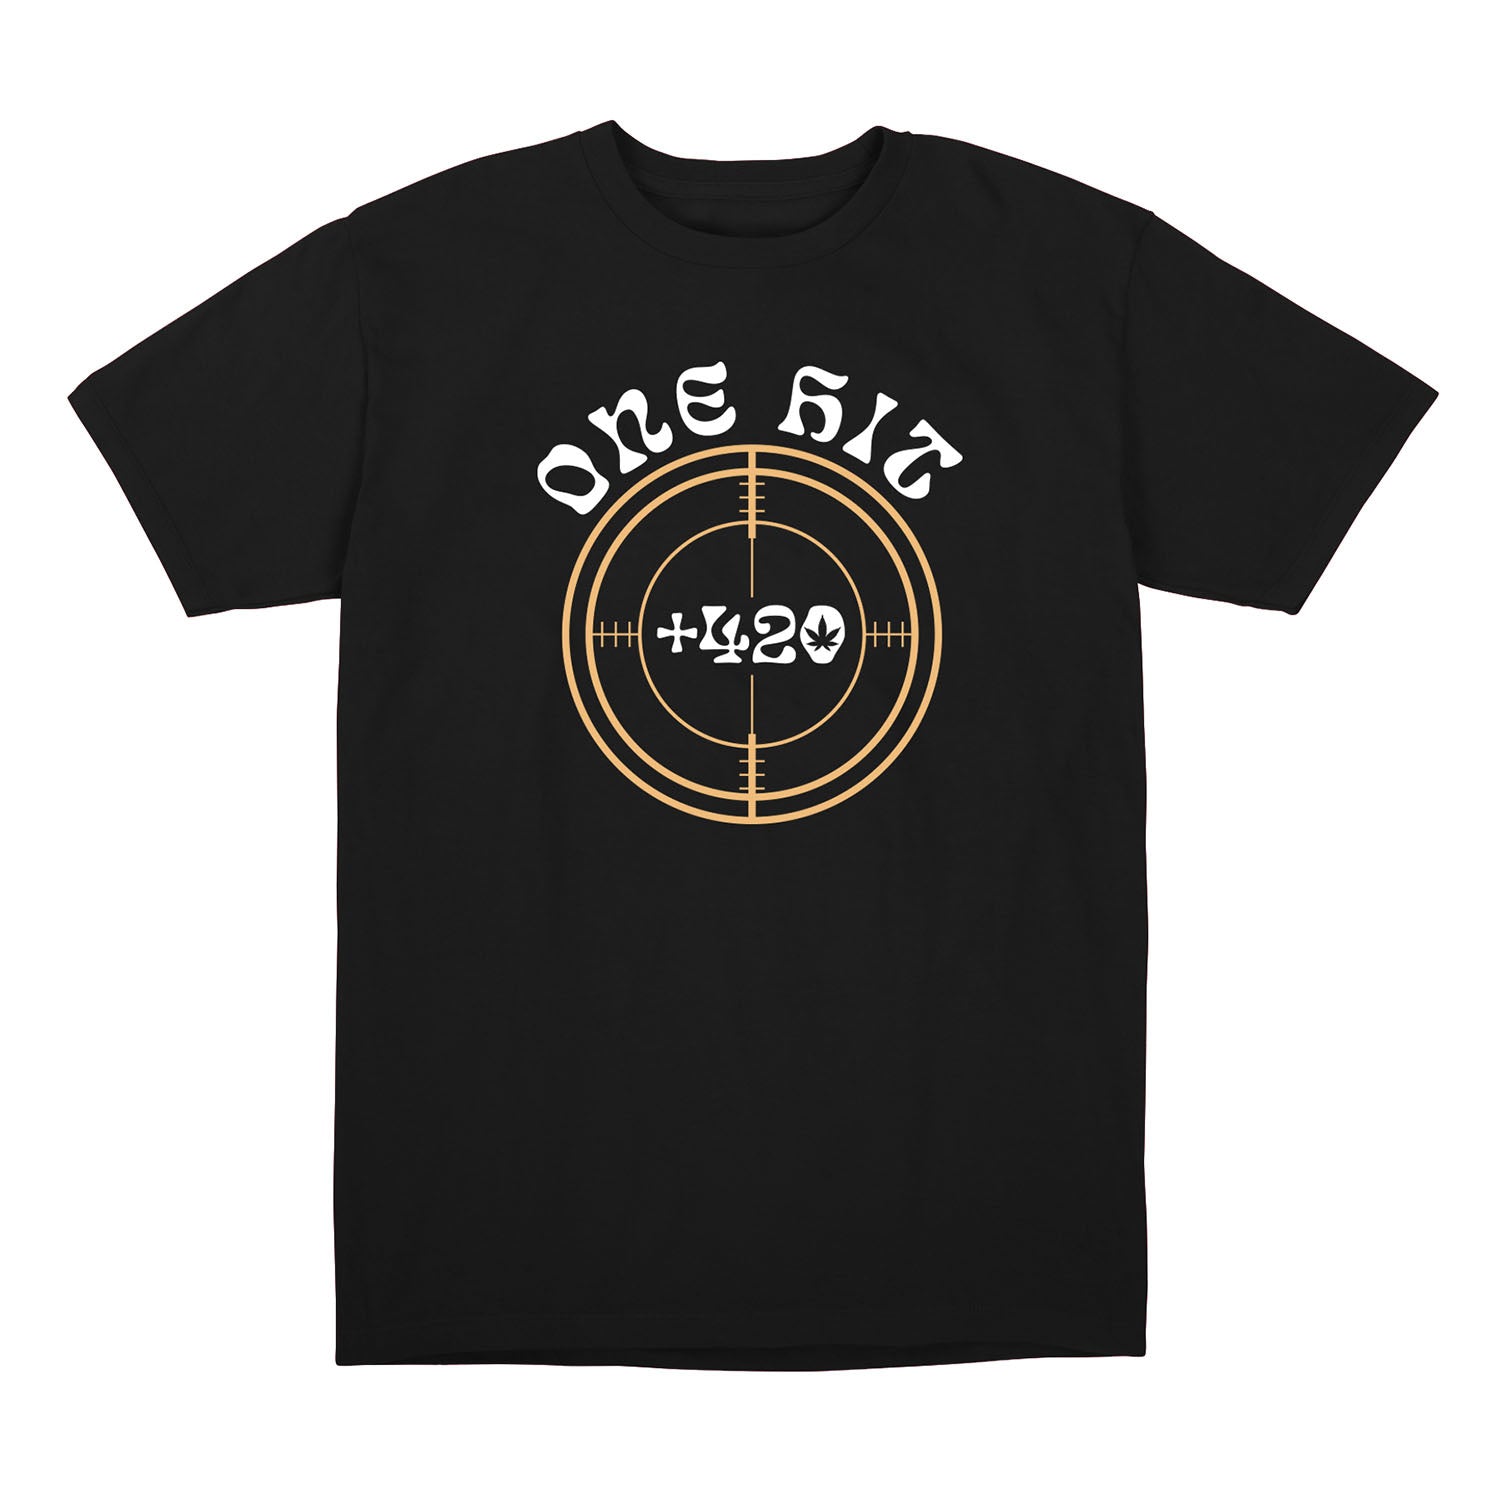 Call of Duty Black One Hit 420 T-Shirt - Front View